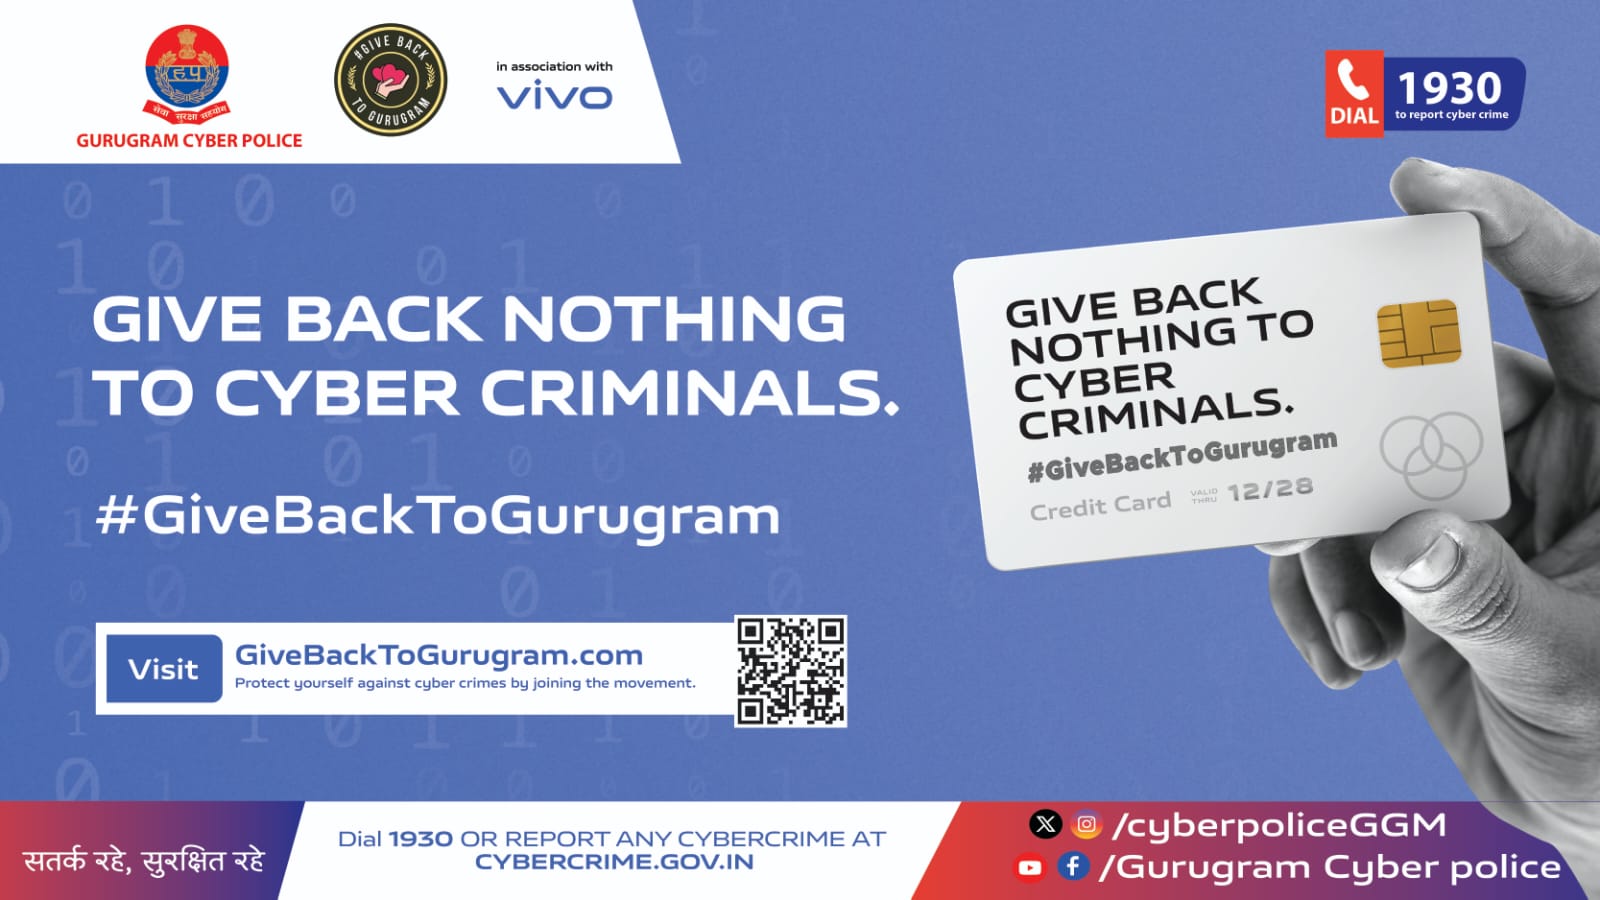 vivo and Cyber Police Gurugram Join Hands to Raise Awareness on Cyber Security | CSR Mandate